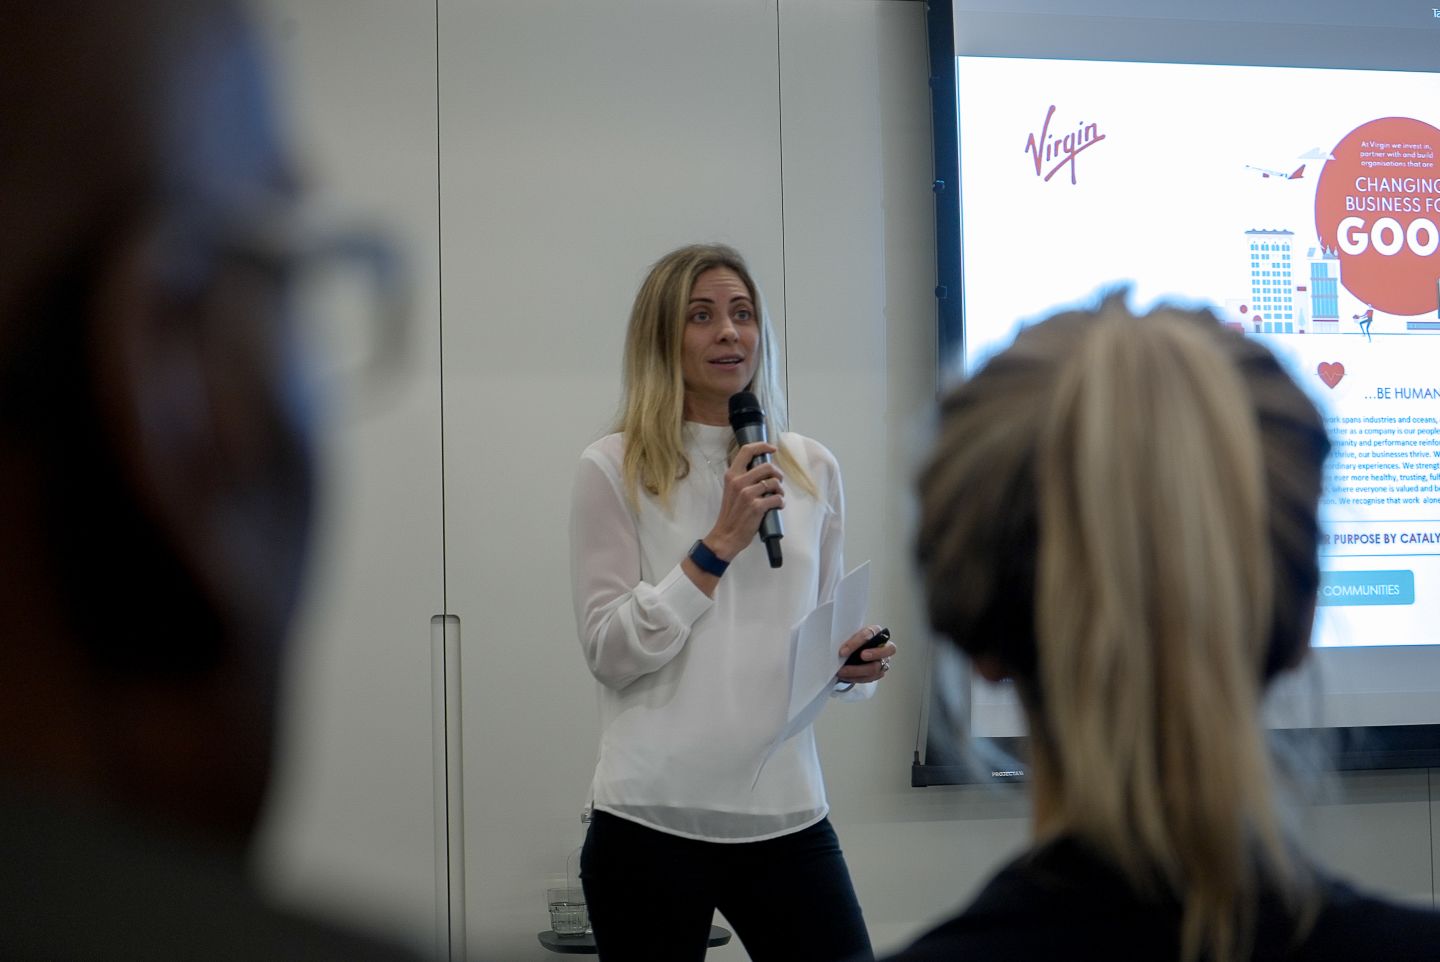 Holly Branson speaking at a townhall event for Virgin Management and Virgin Red